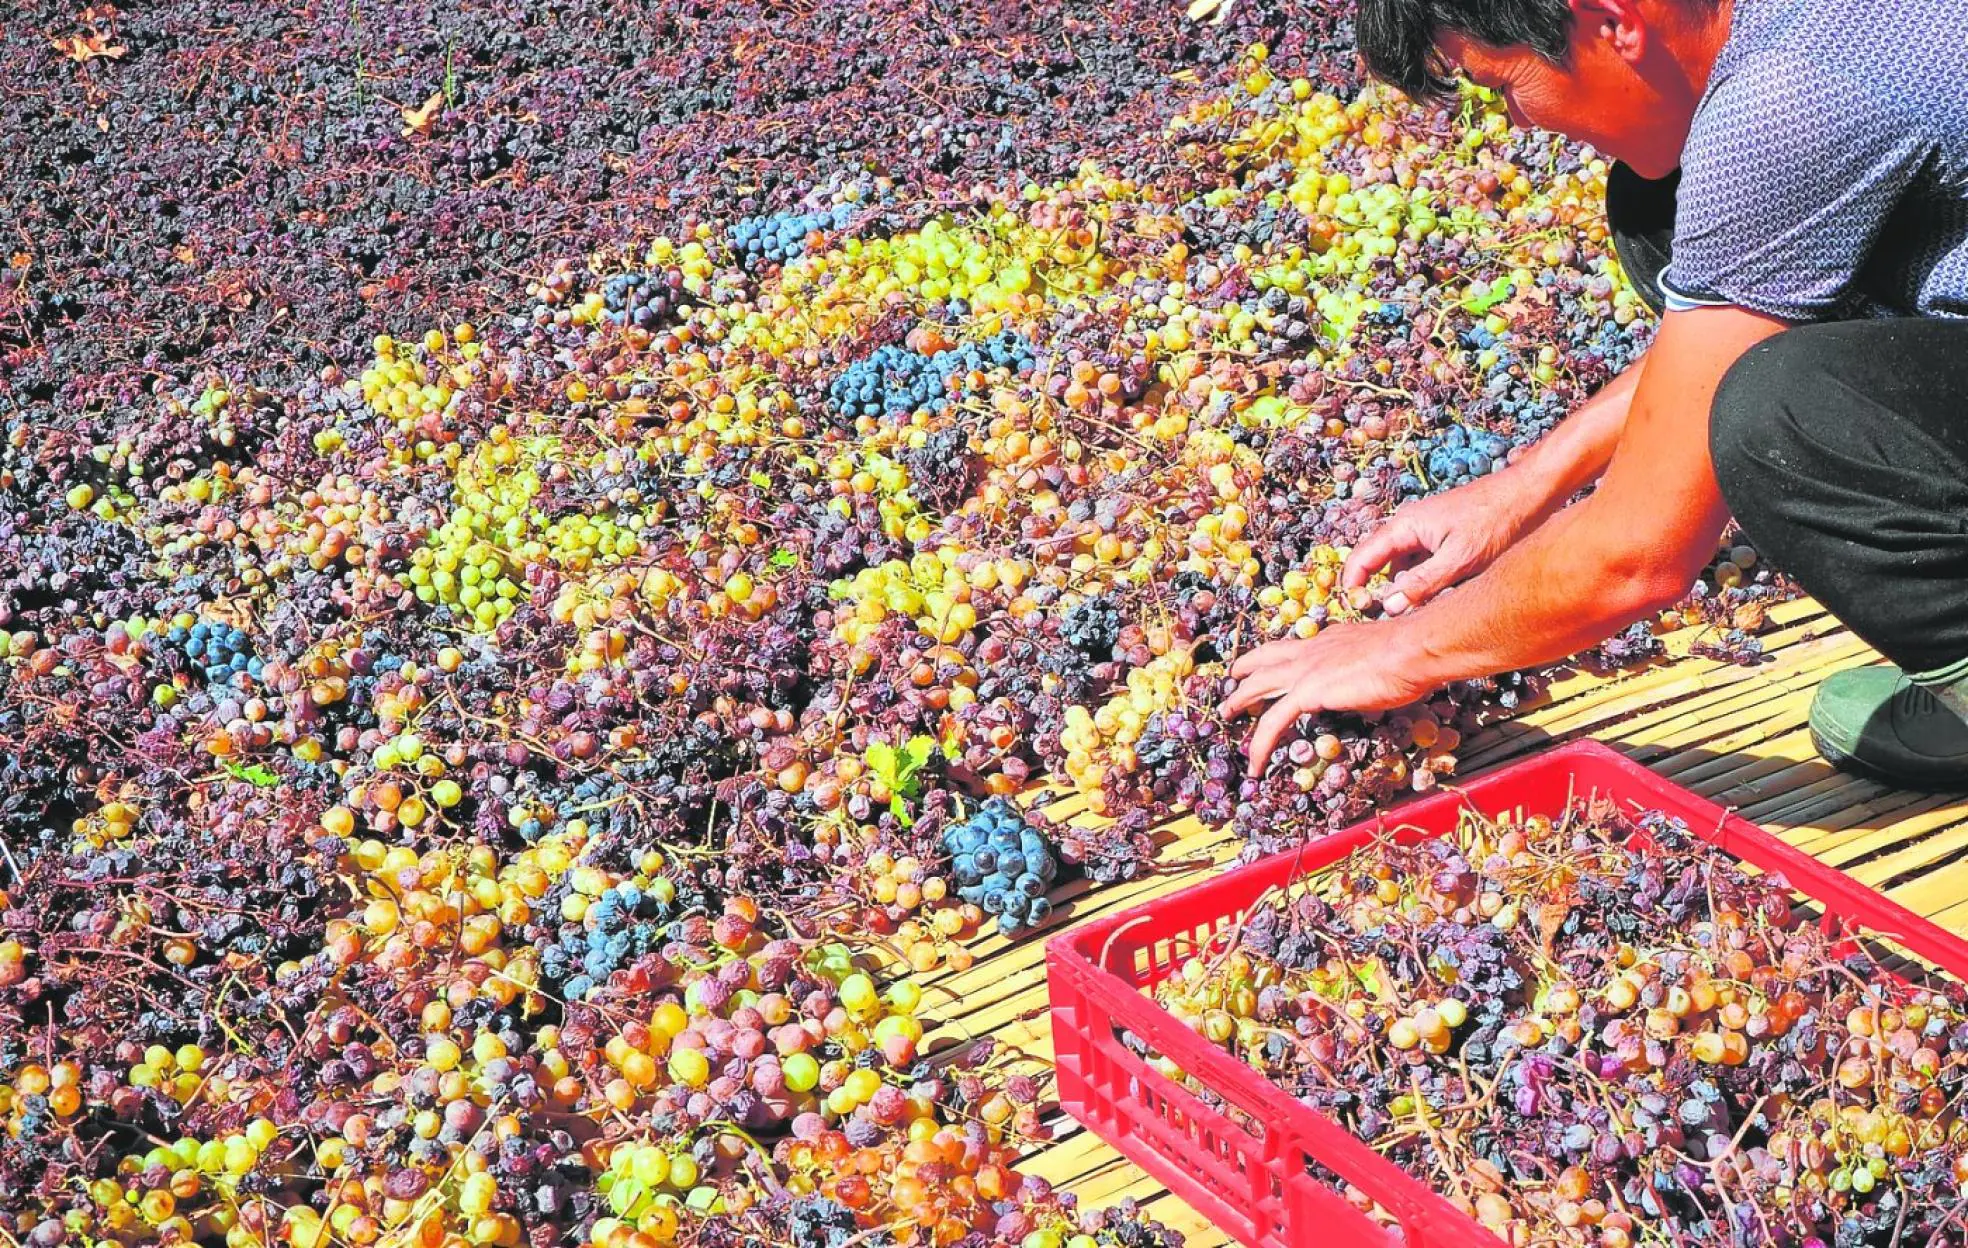 The moscatel raisins of Malaga are produced by drying the grapes in the sun for approximately one month. 